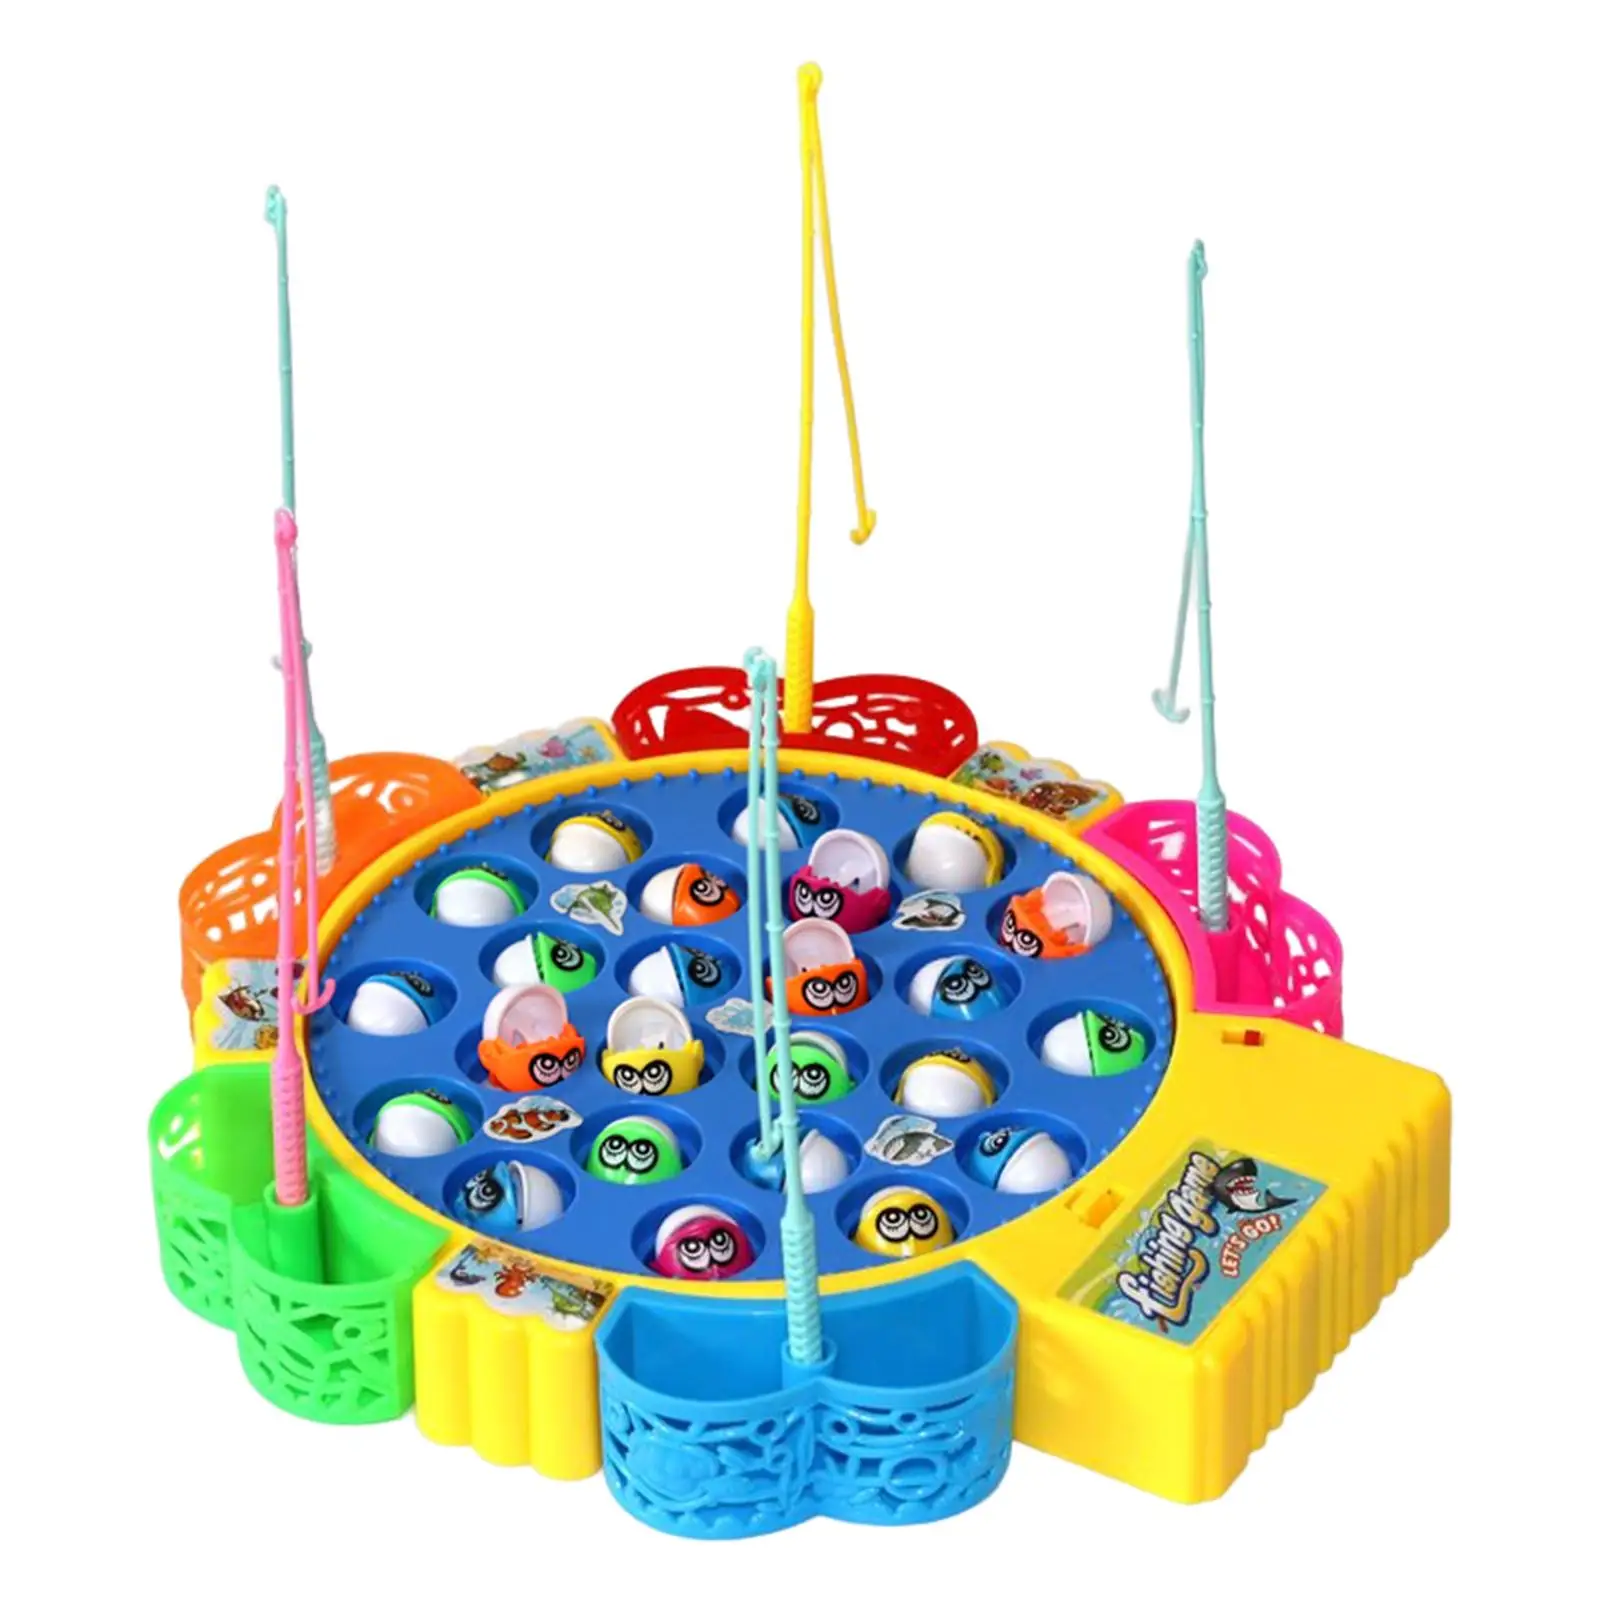 Rotating Fishing Game Kids toy, kids Fishing Toy for Early Learning Toy